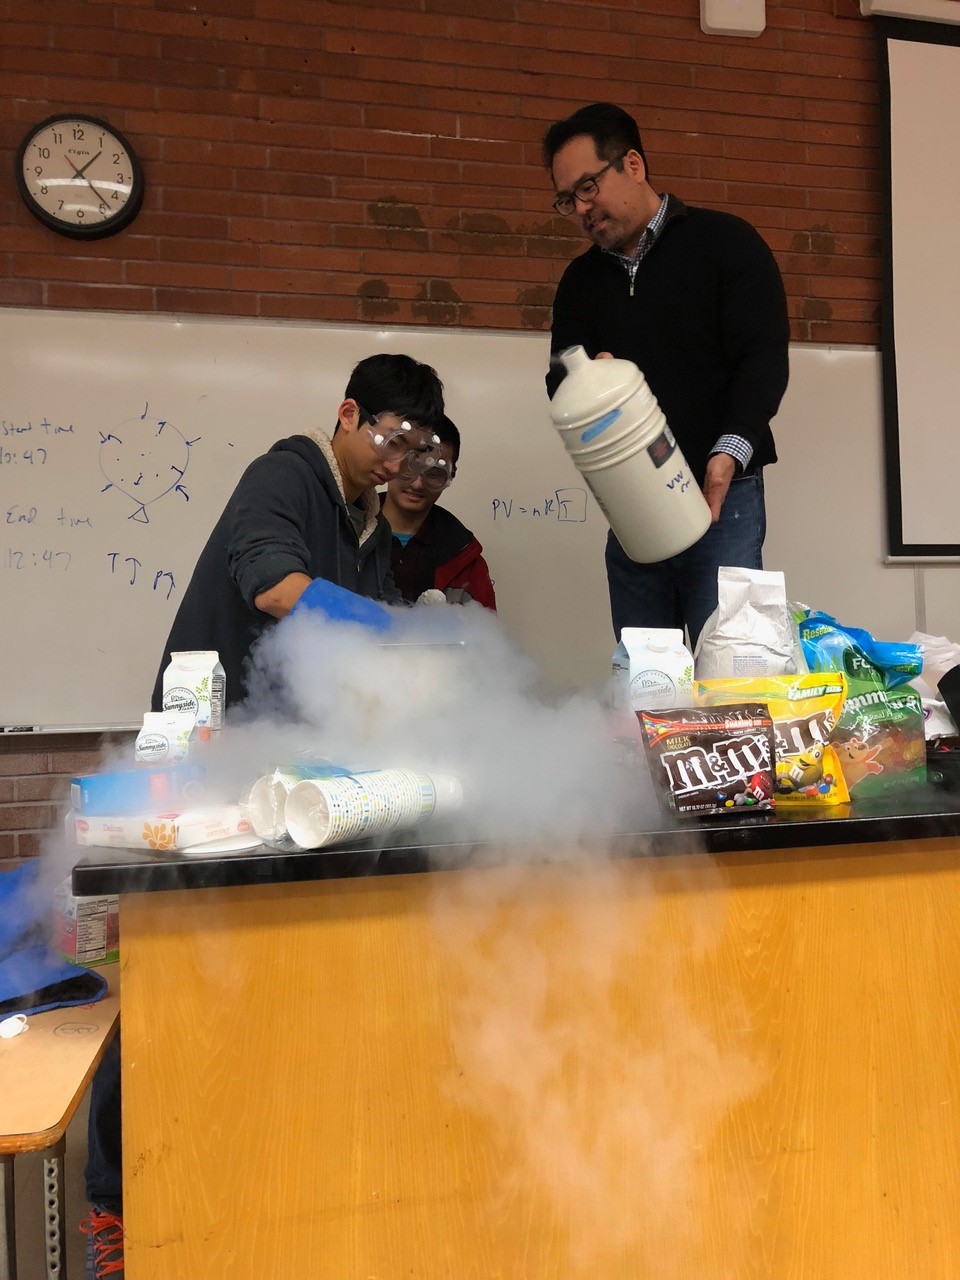 One person pouring liquid nitrogen into a container while another person stirs and a third person watches